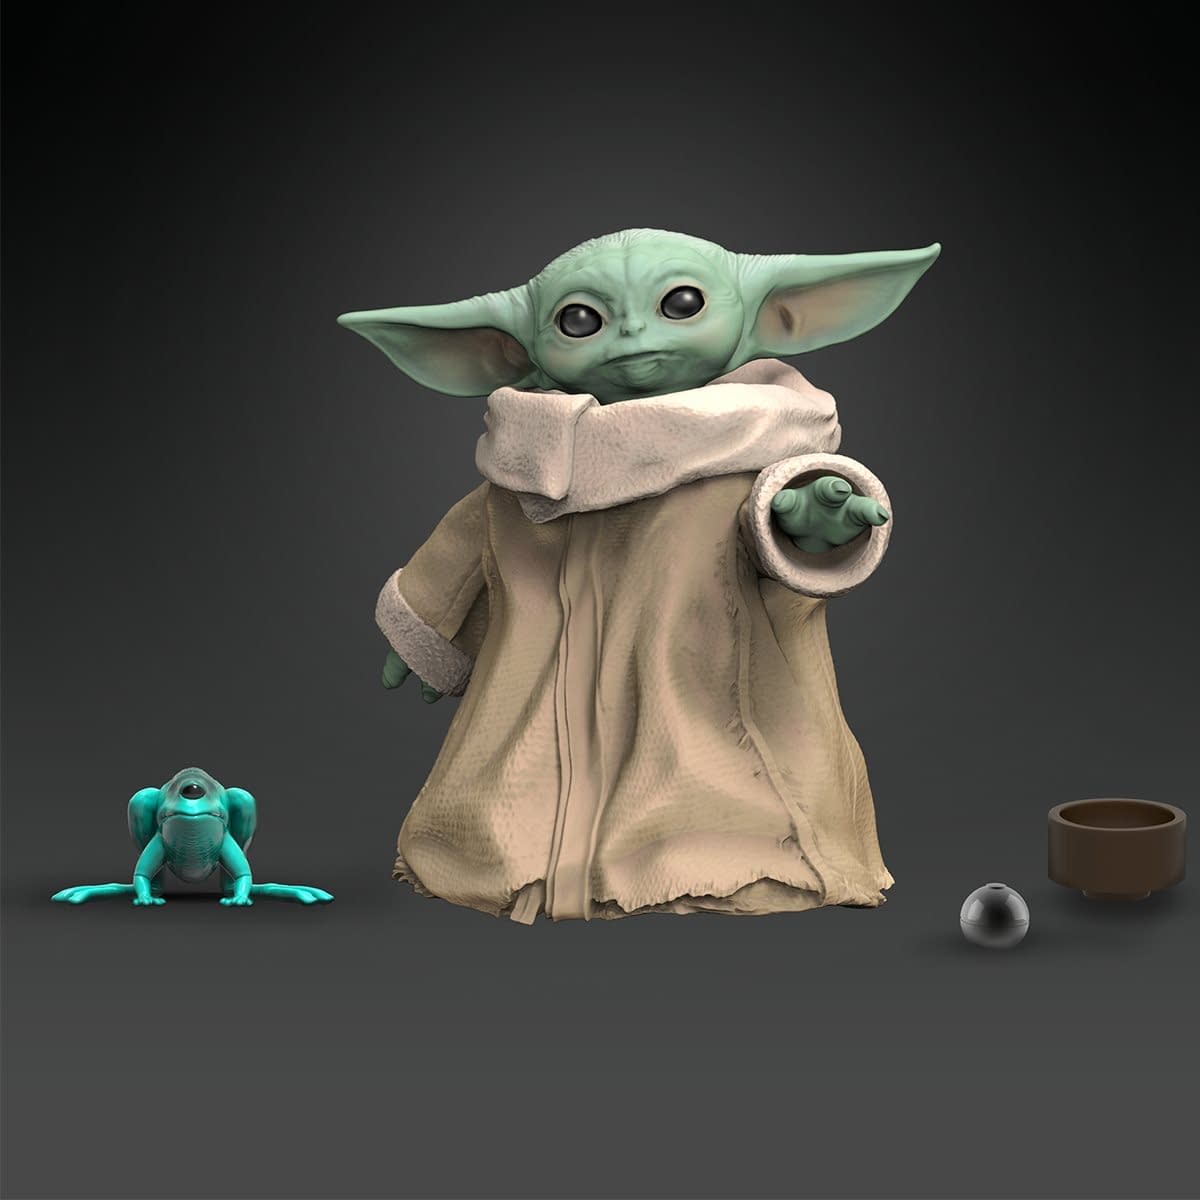 Baby Yoda and More Toys Could be Halted Due to Coronavirus 